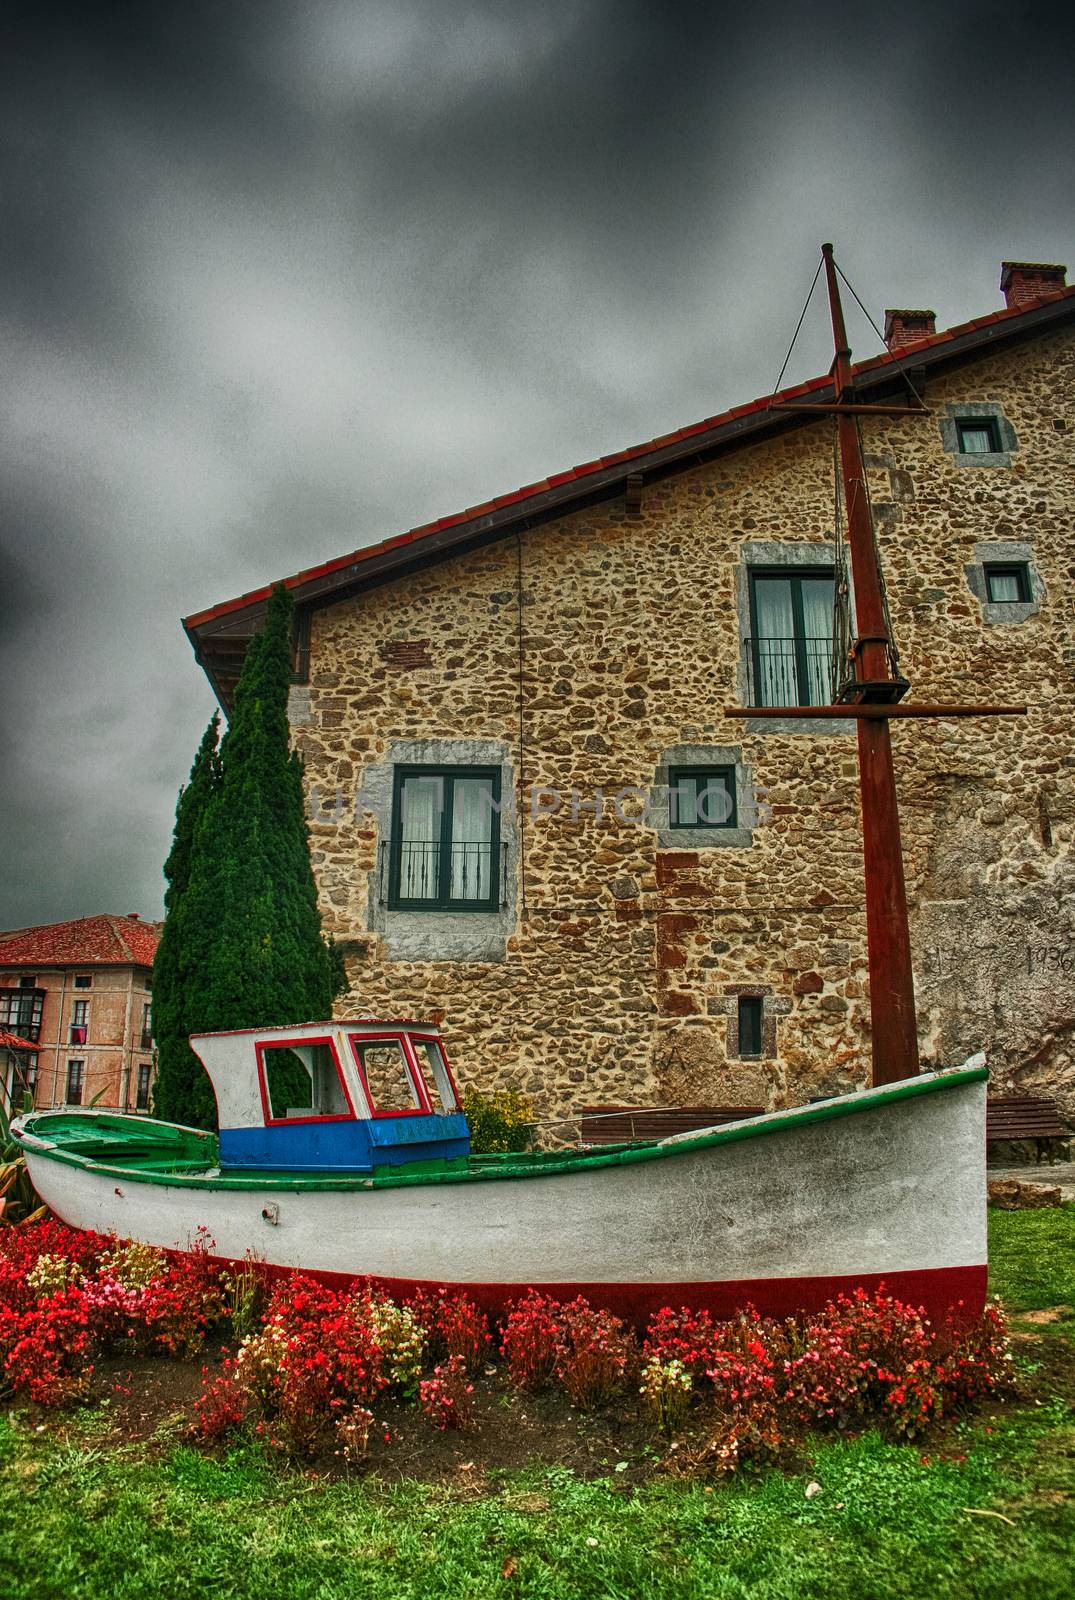 Colourful Boat on a garden.